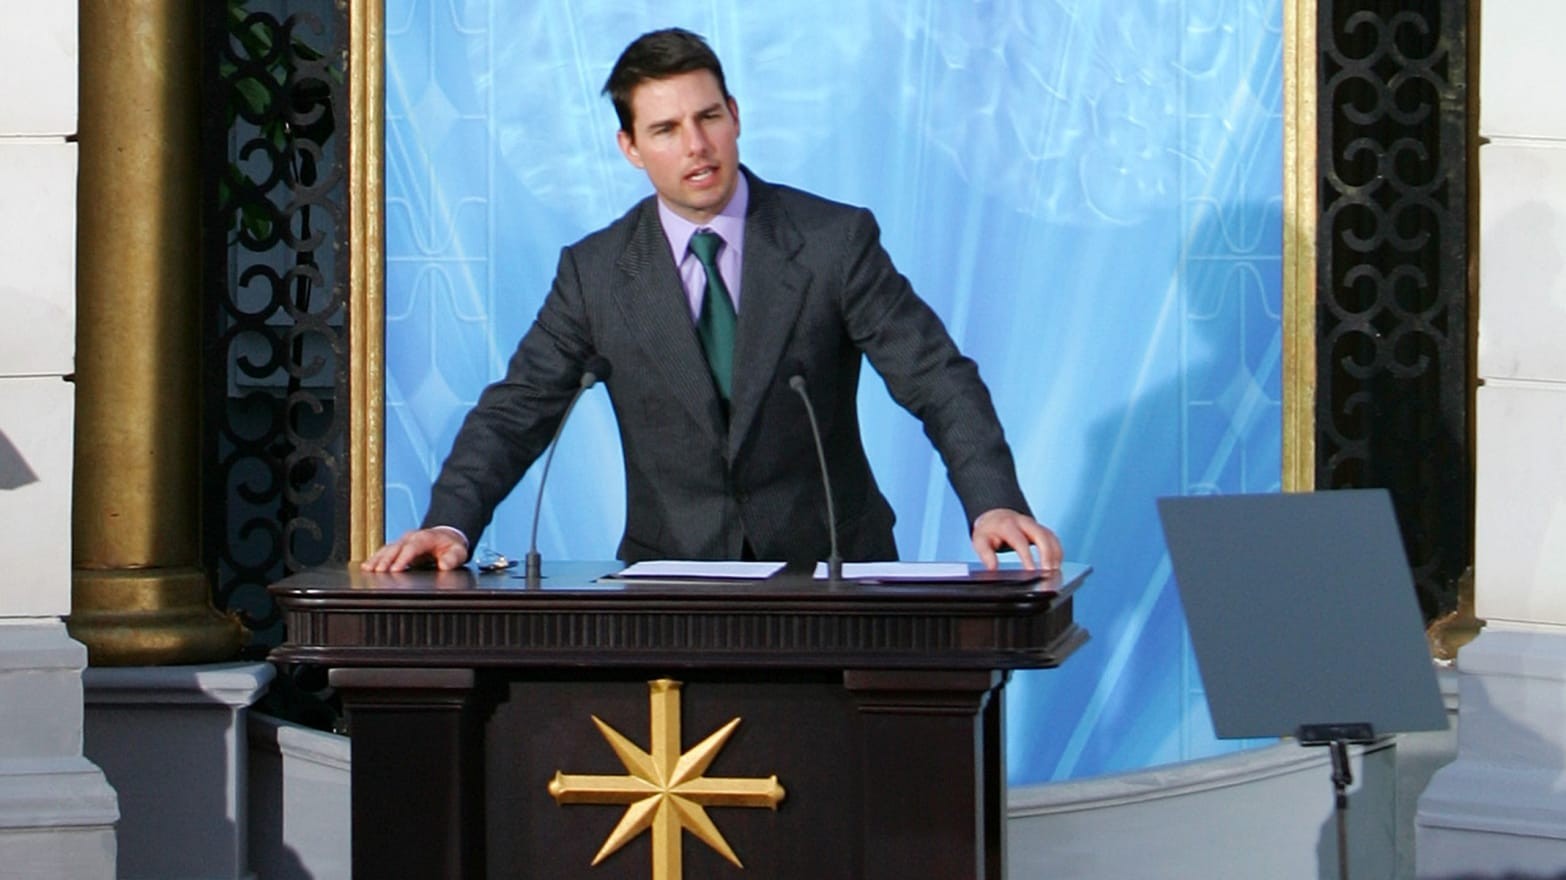 Tom Cruise at a Scientology event